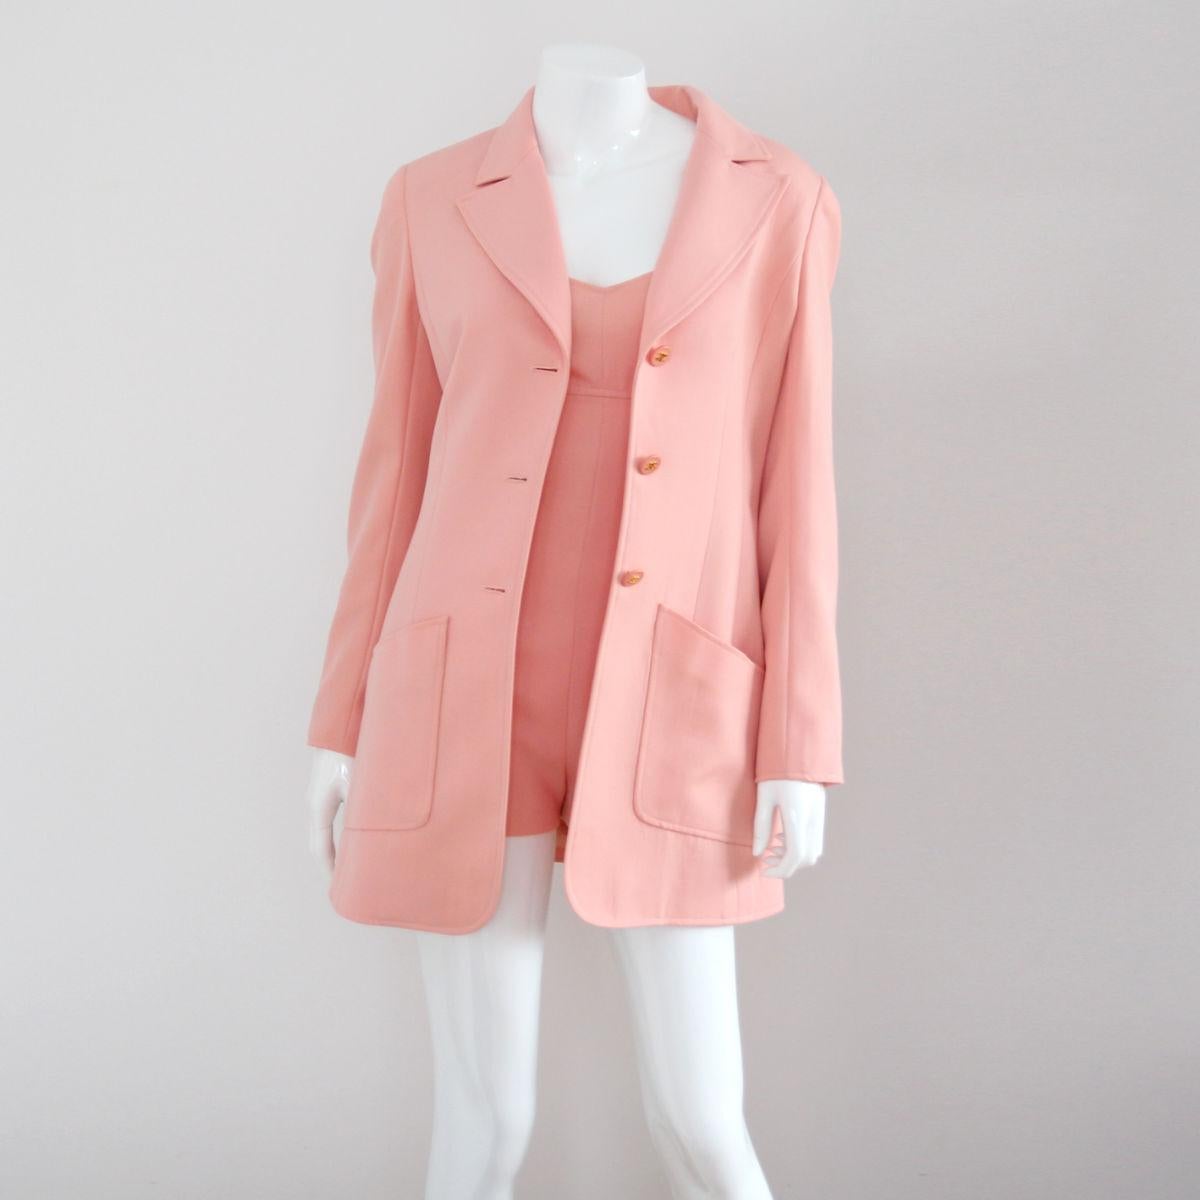 Women's CHANEL 1997 Pink Jacket & Jumpsuit Set - CC Logo Buttons by Karl Lagerfeld